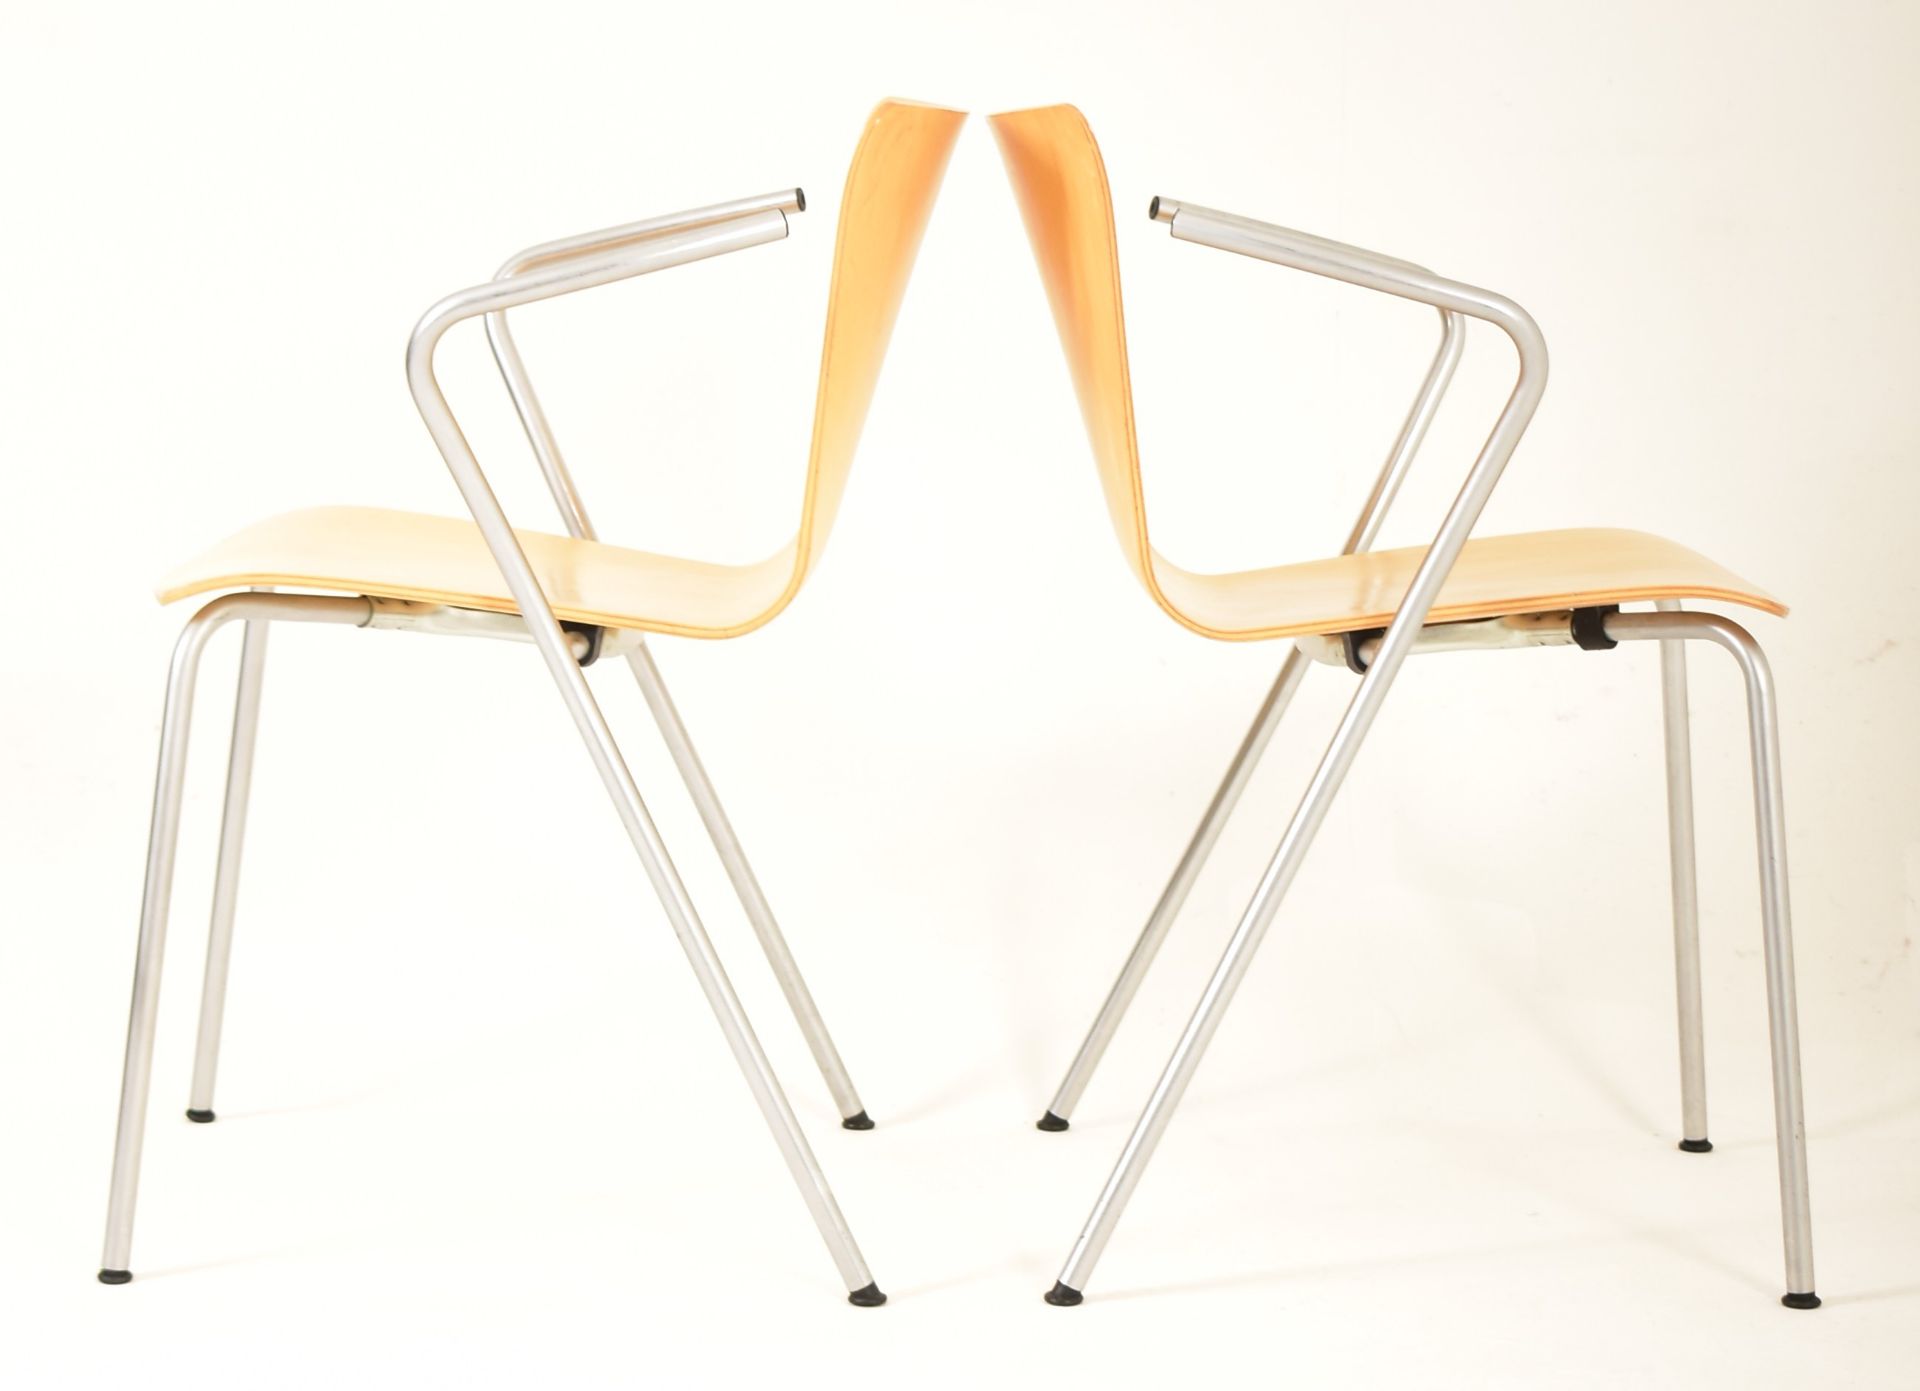 VICO MAGISTRETTI FOR FRITZ HANSEN - VICO DUO - SIX DINING CHAIRS - Image 5 of 6